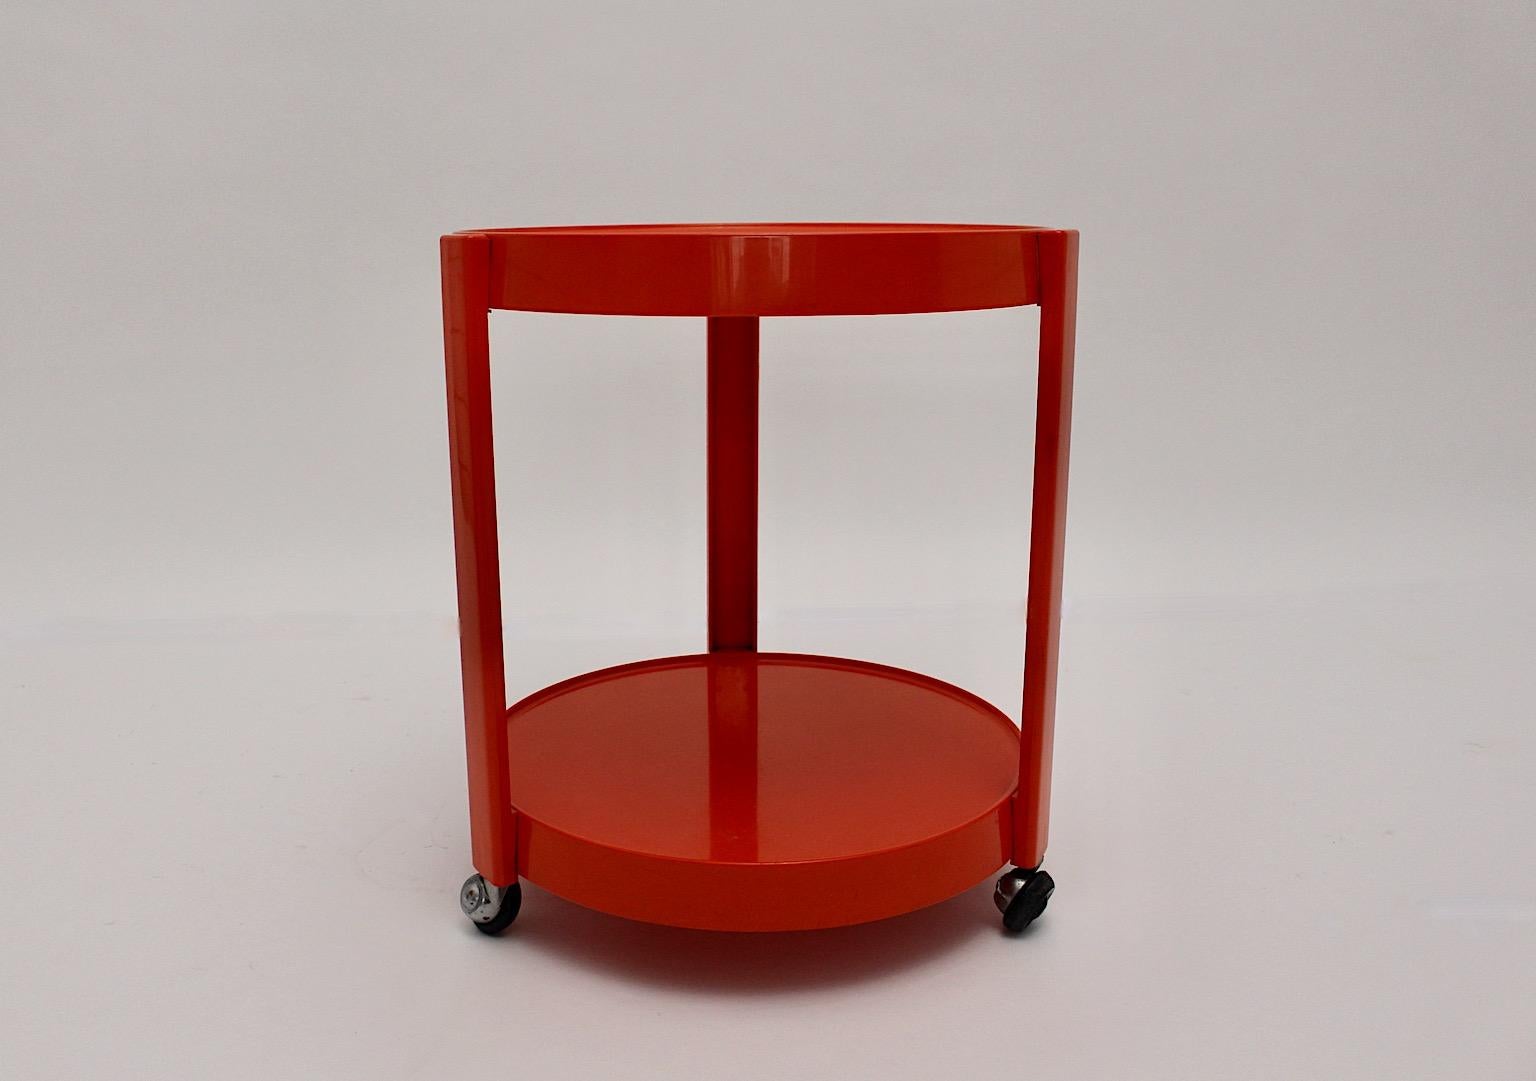 Space Age Vintage Red Orange Plastic Bar Cart, 1970s, Germany In Good Condition For Sale In Vienna, AT